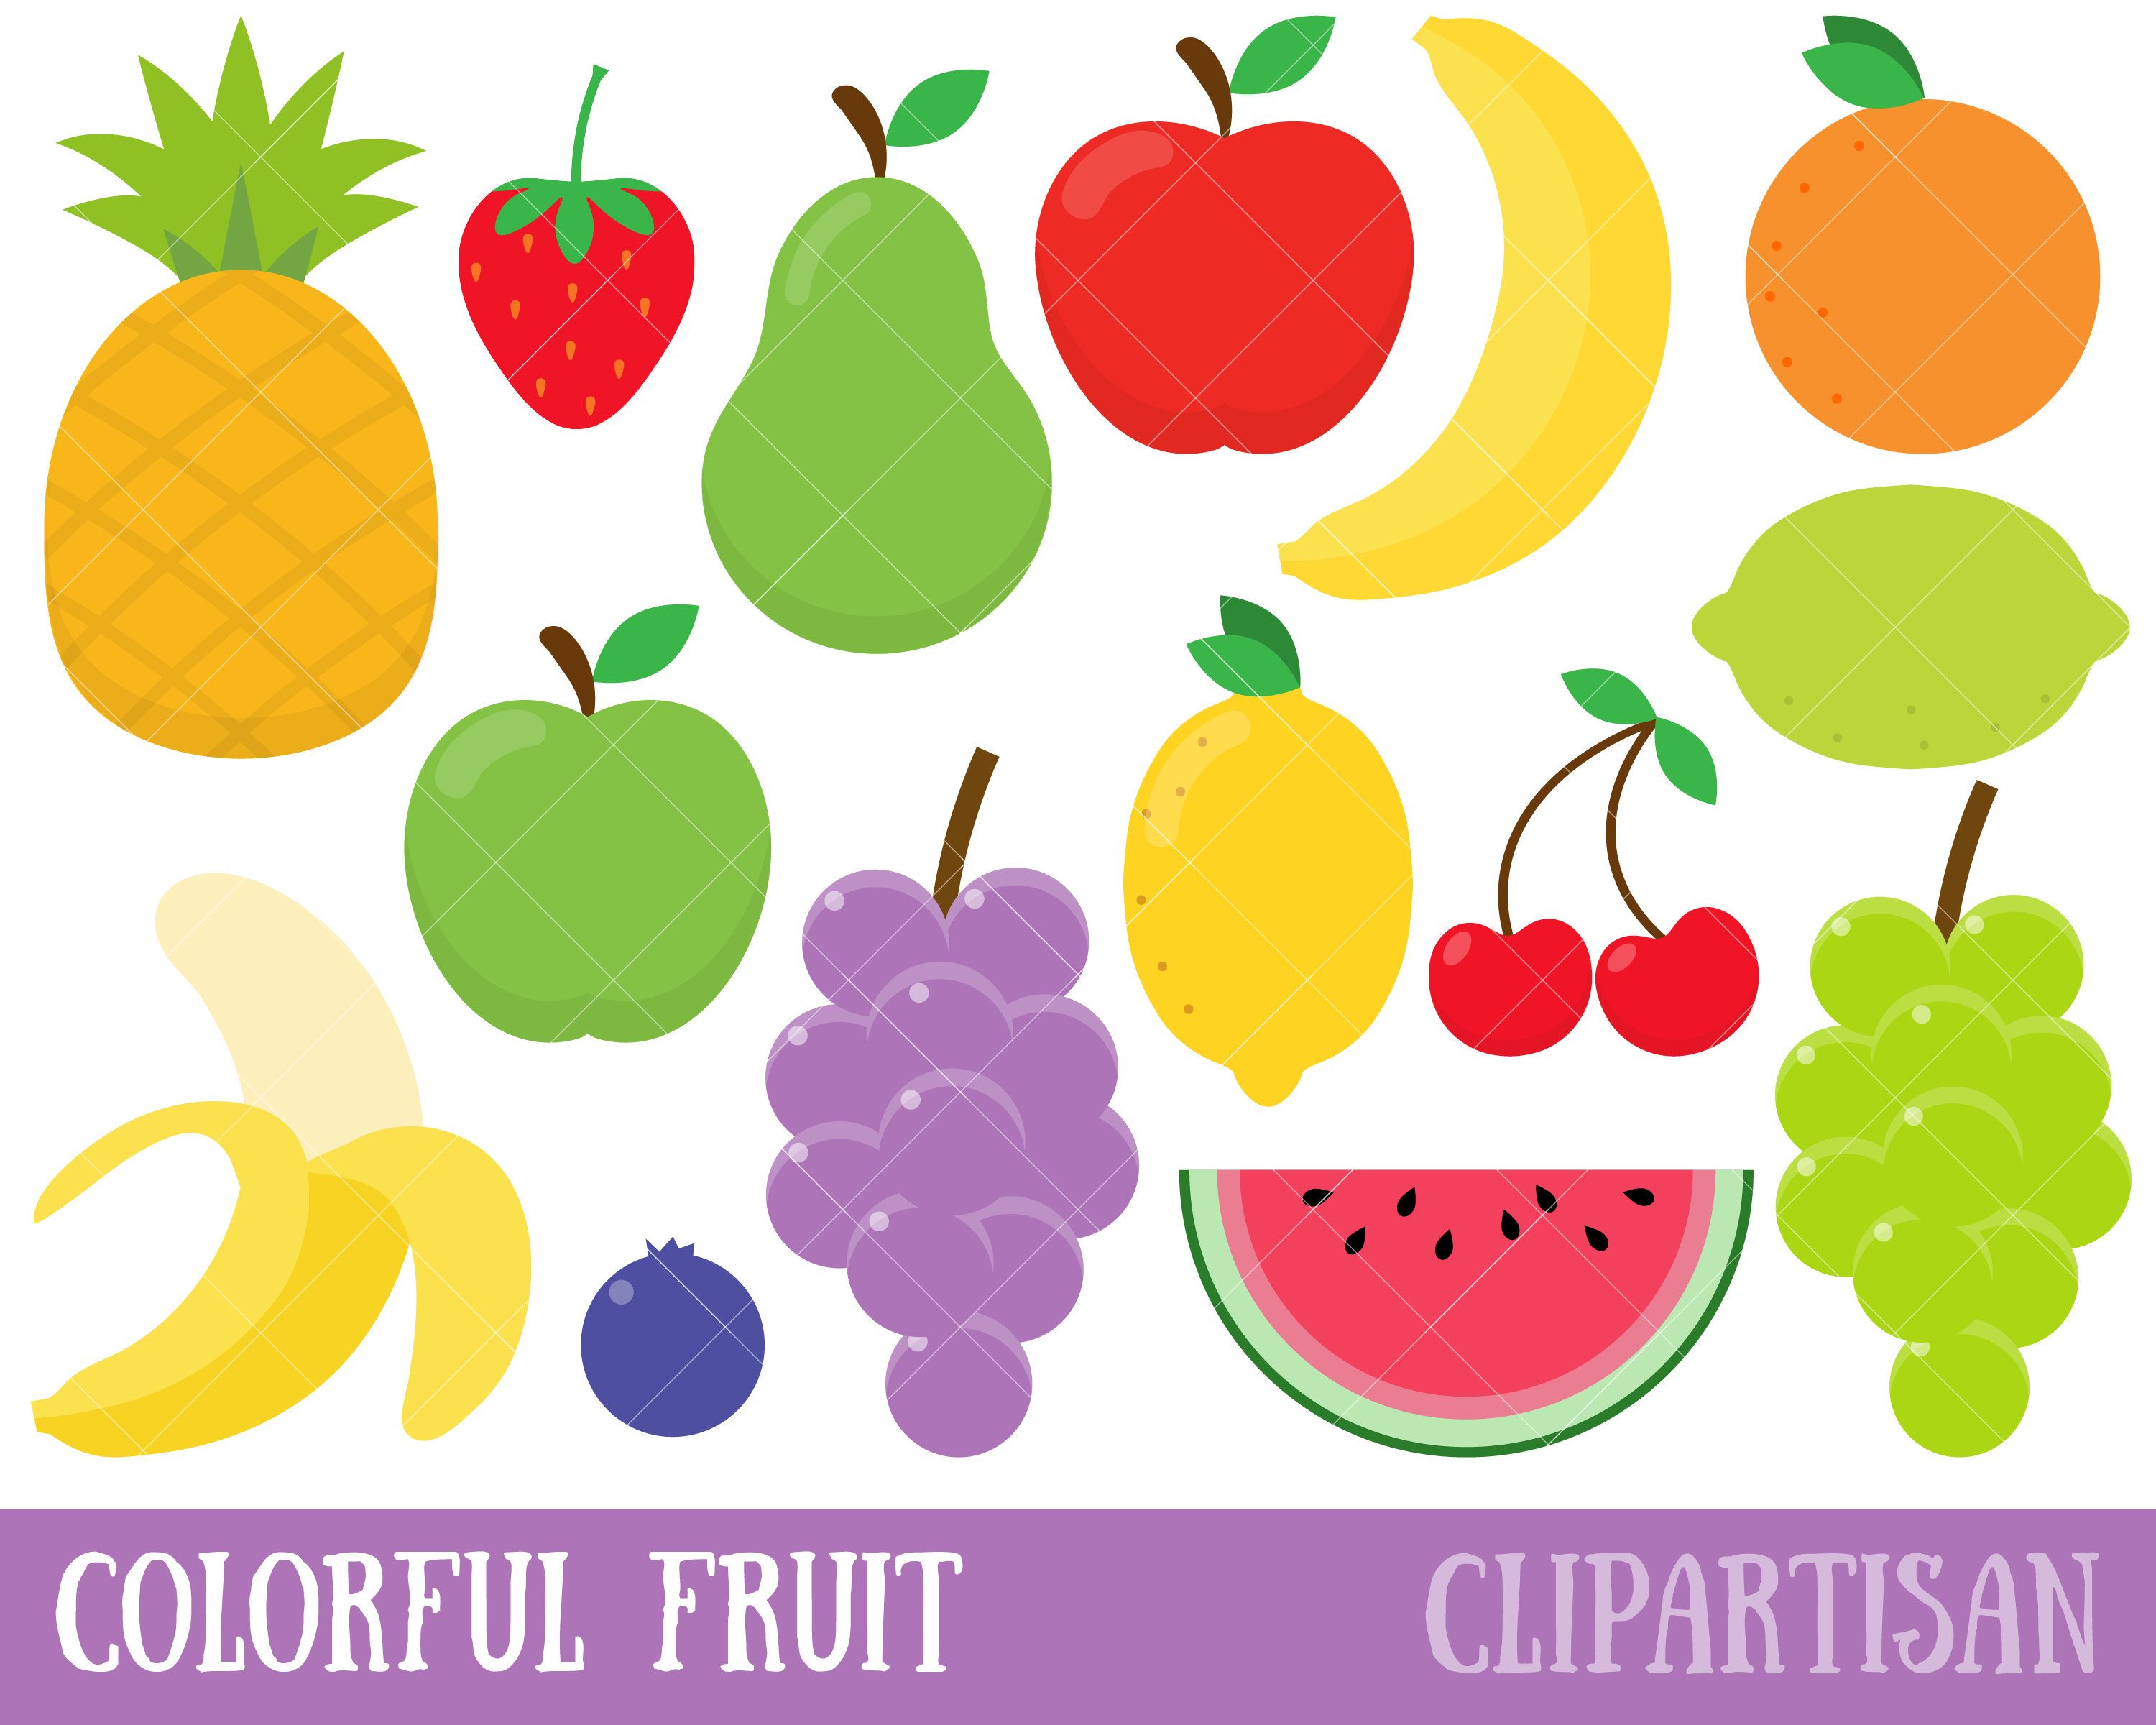 Strawberry watermelon . Clipart fruit collage